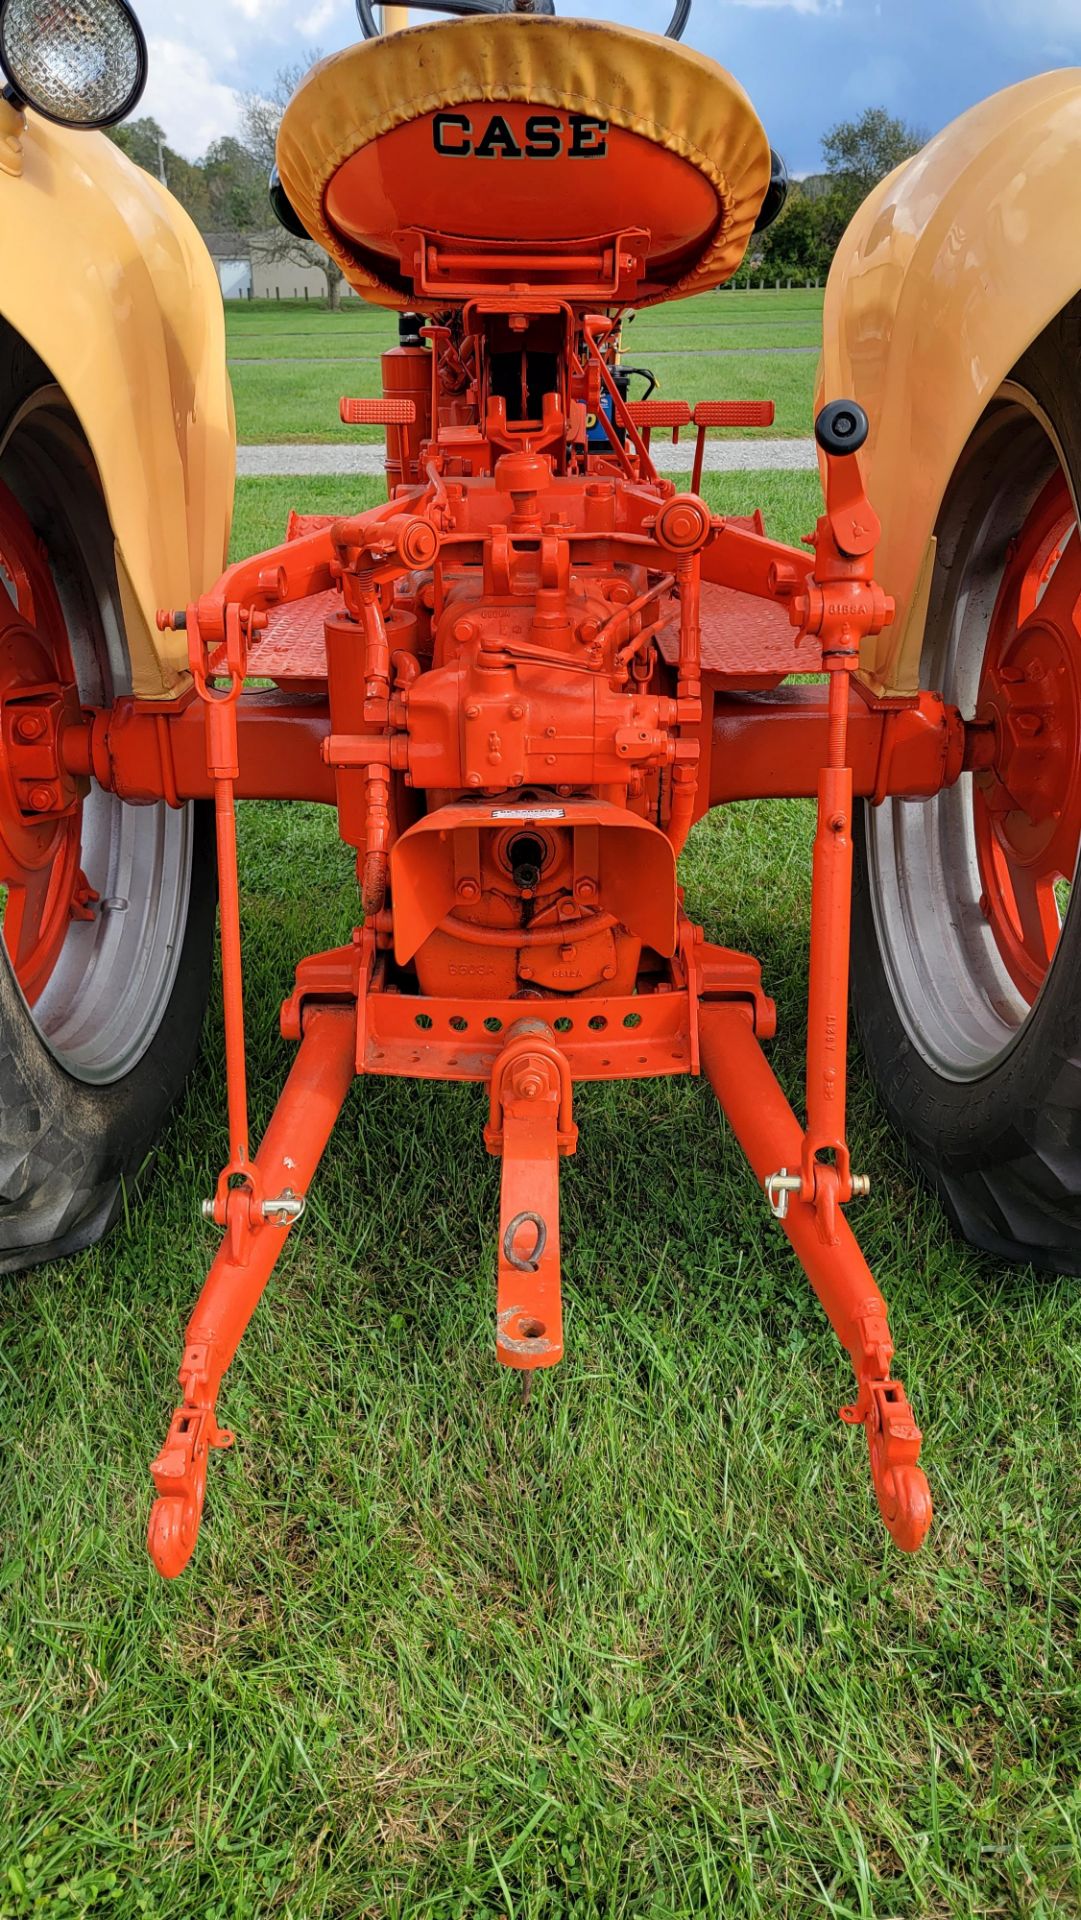 1956 Case 400 Row Crop Tractor, Model 411, s/n 8081224, Gasoline Engine, New in 1956, Restored - Image 26 of 32